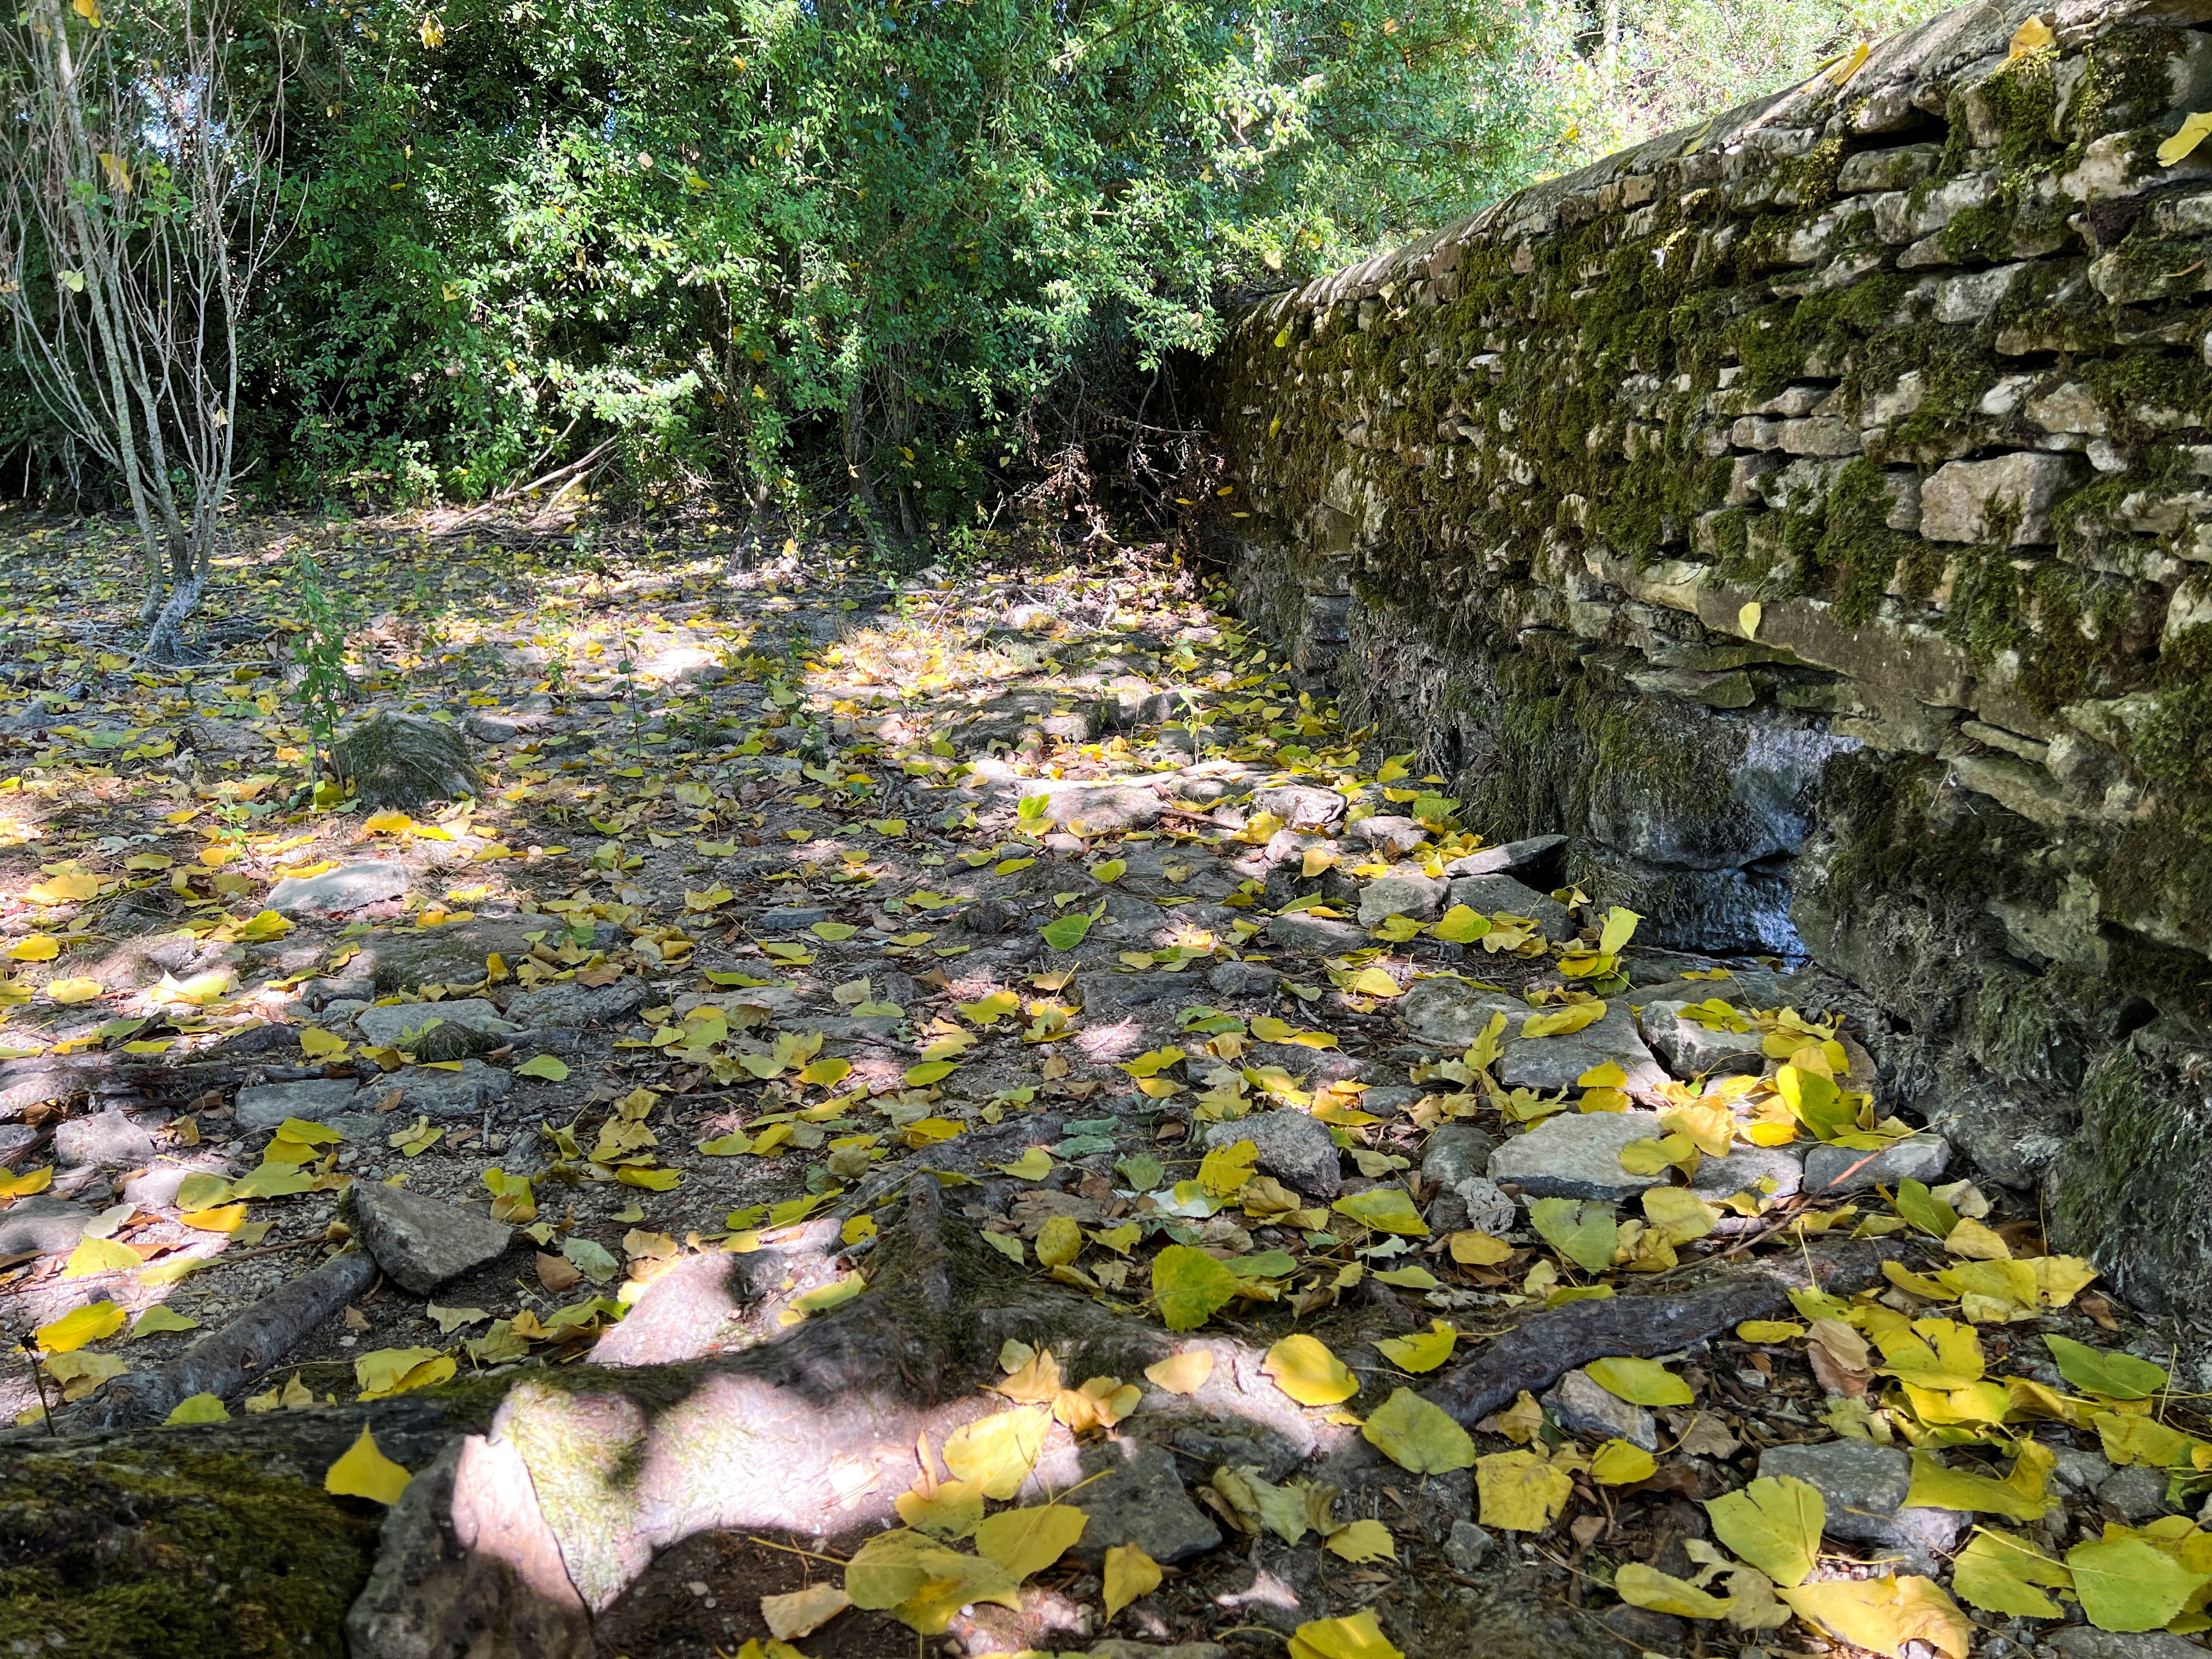 A general view of a weir and dried riverbed near the source of the River Thames, in Kemble